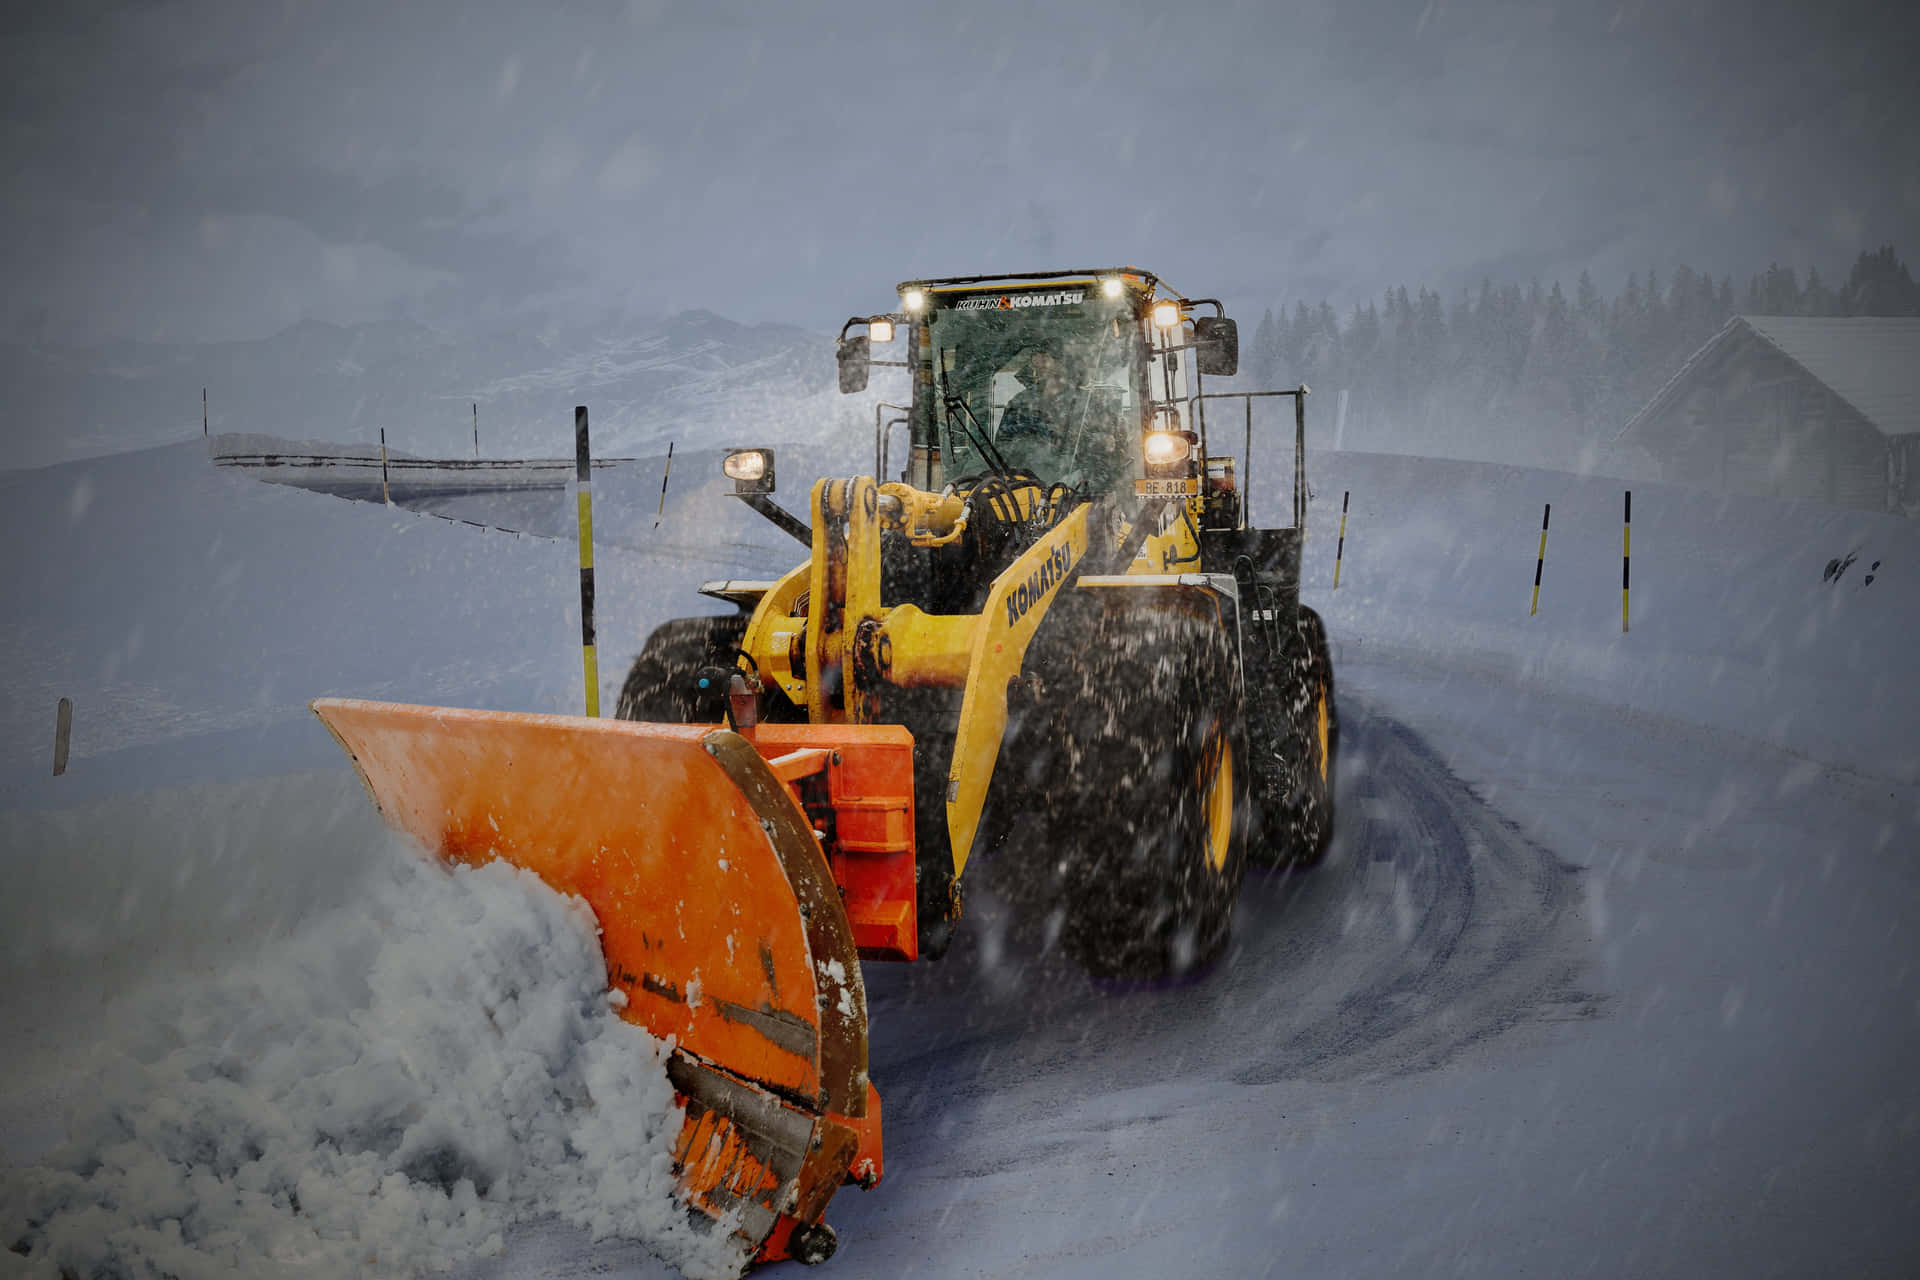 Snowplow clearing a snow-covered road during a heavy snowstorm Wallpaper